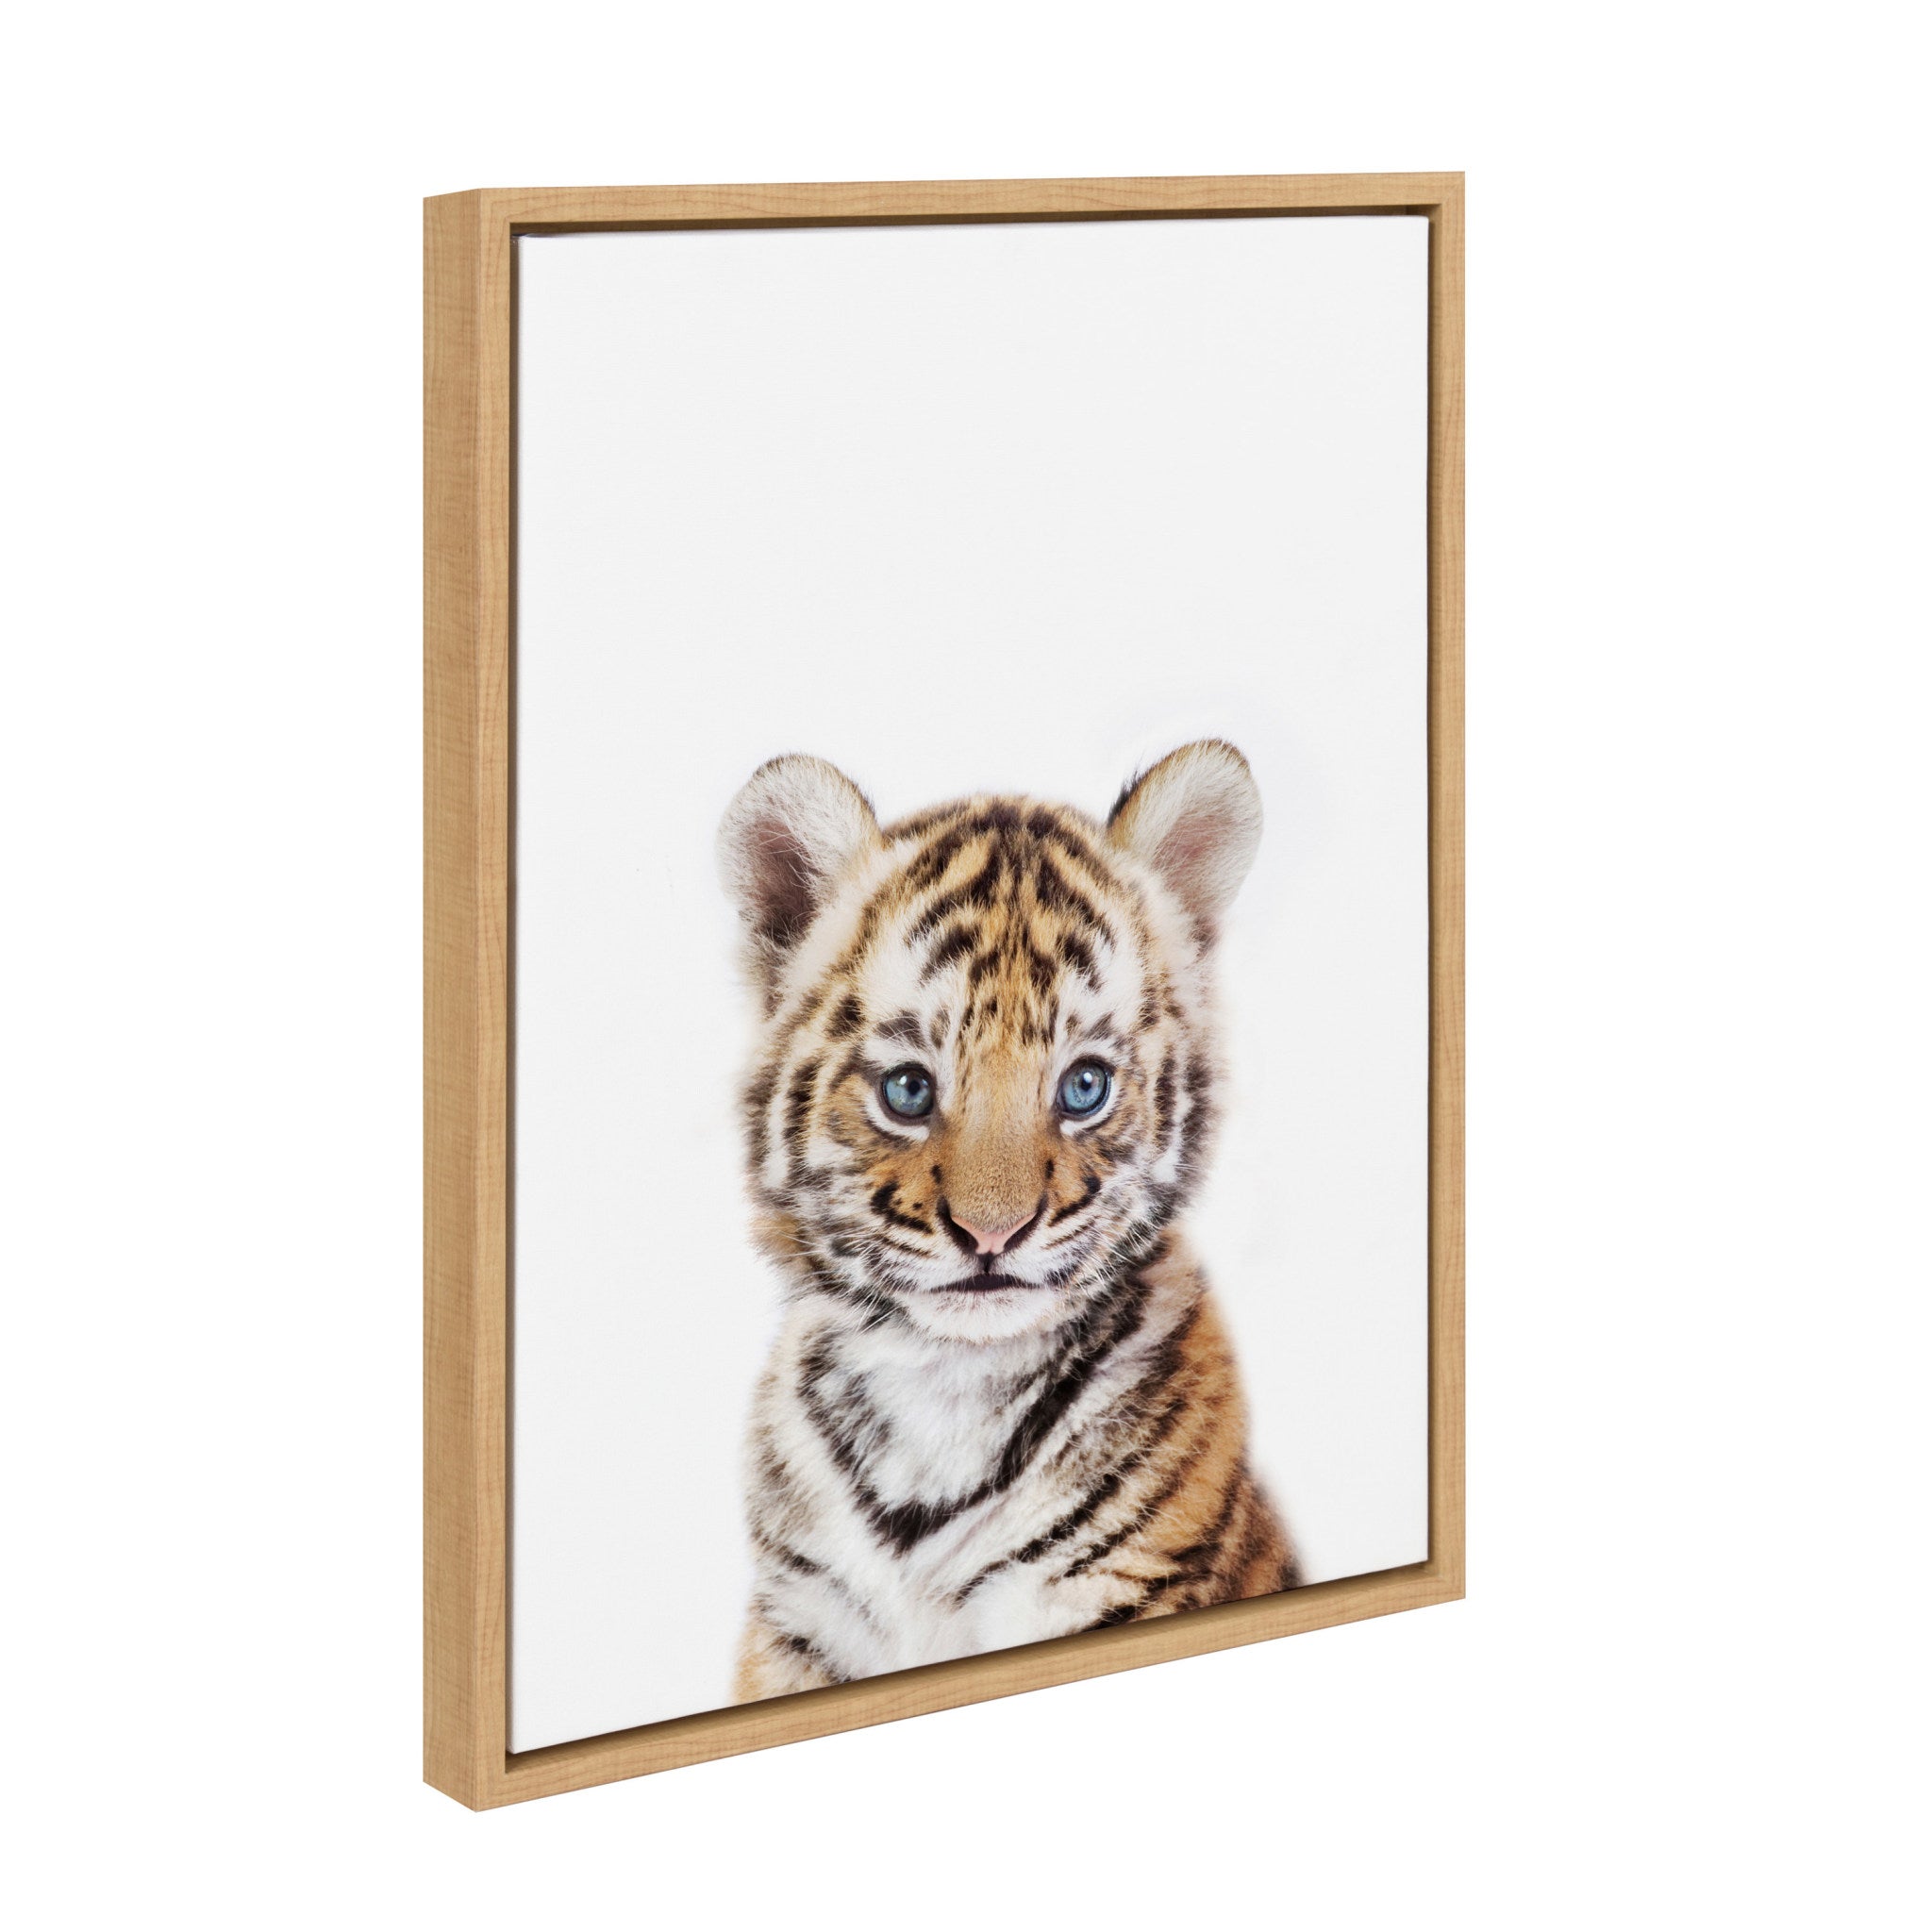 Sylvie Baby Tiger Framed Canvas by Amy Peterson